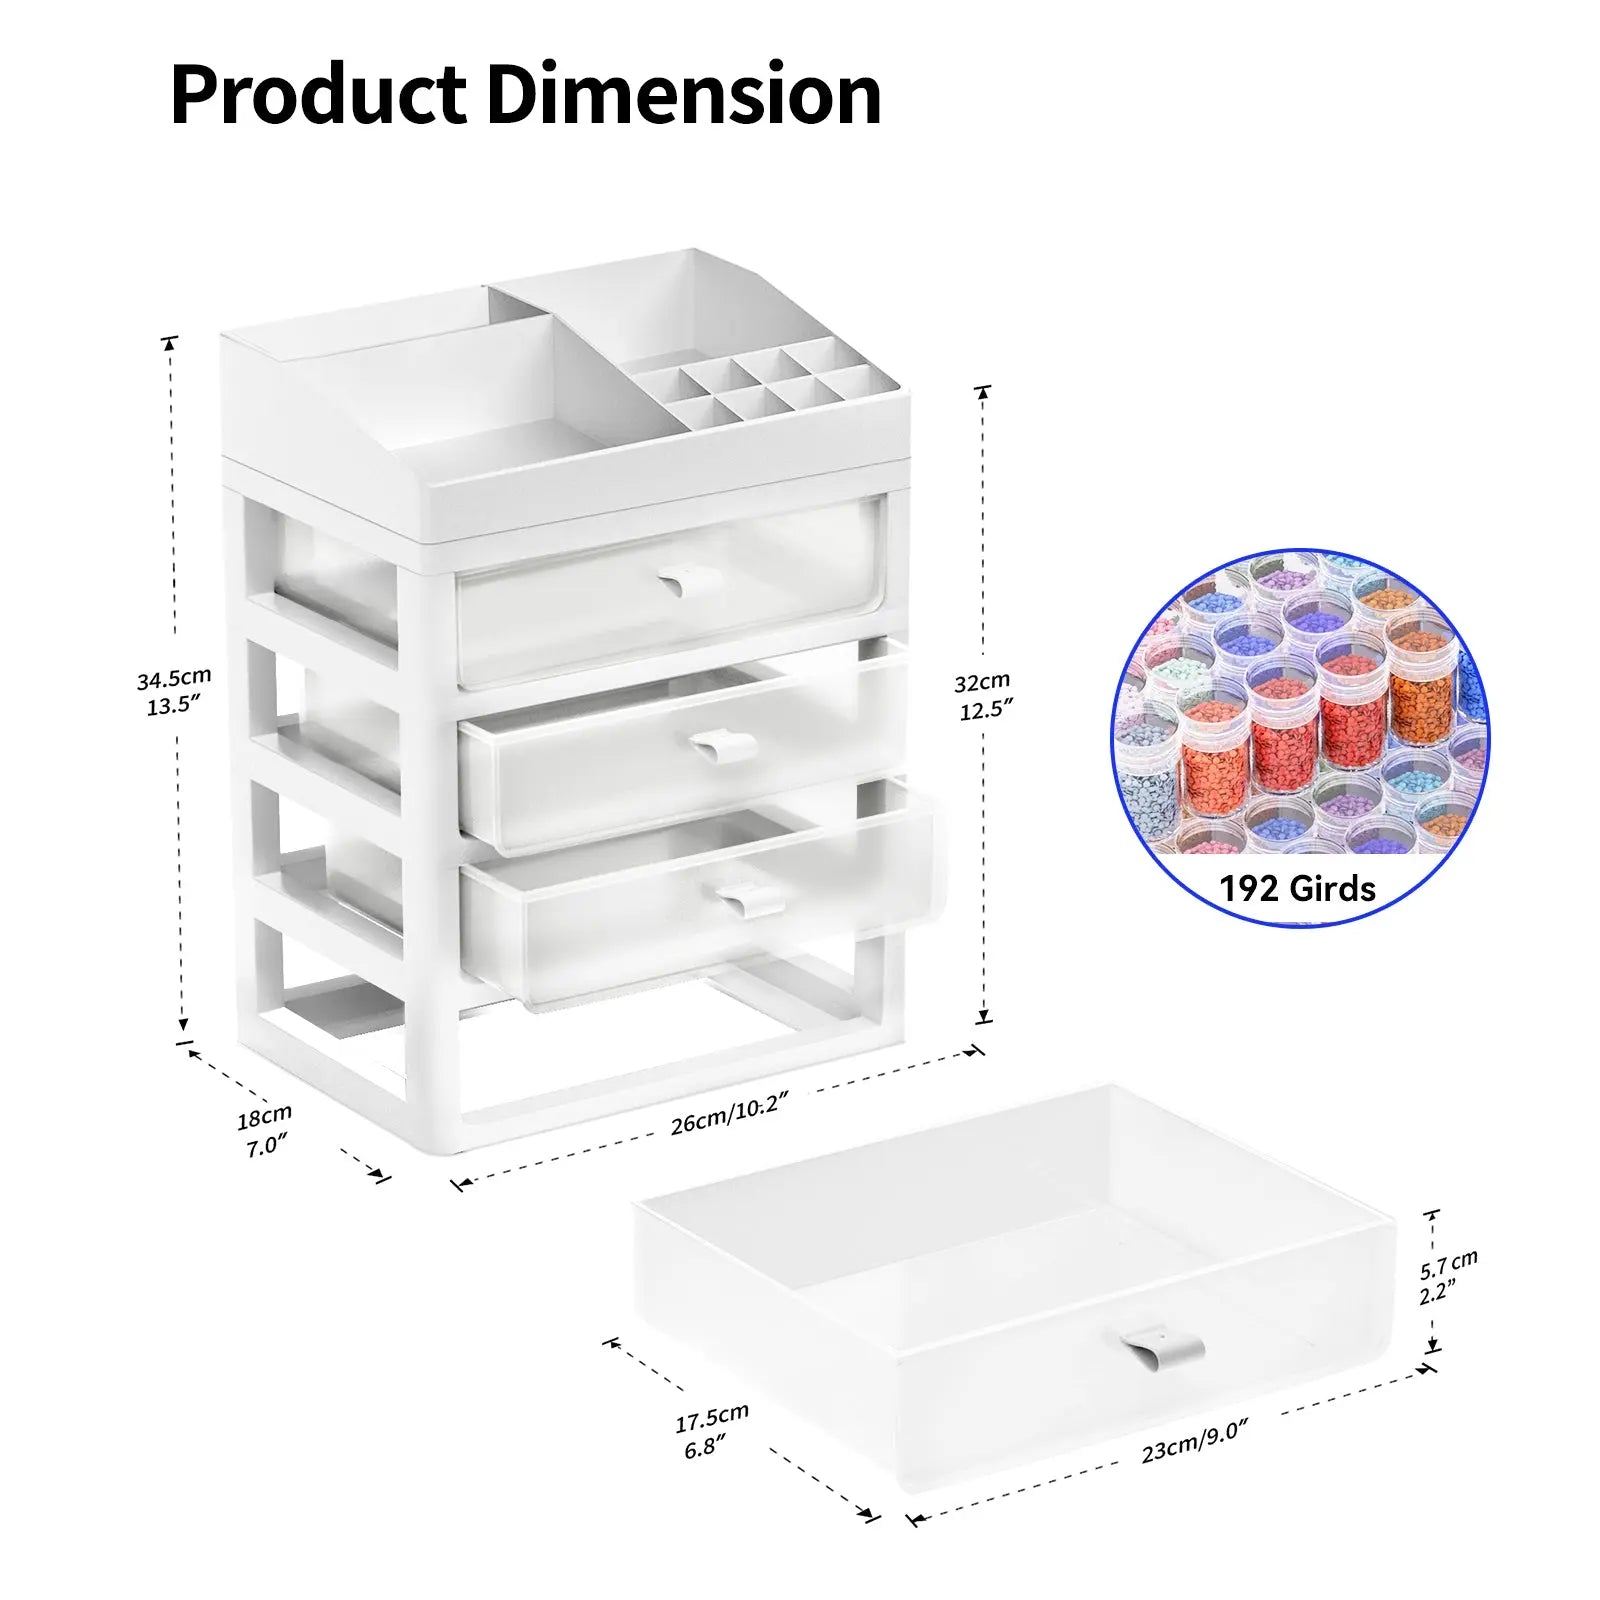 Diamond painting storage - 80 compartments in one spool!!! : r